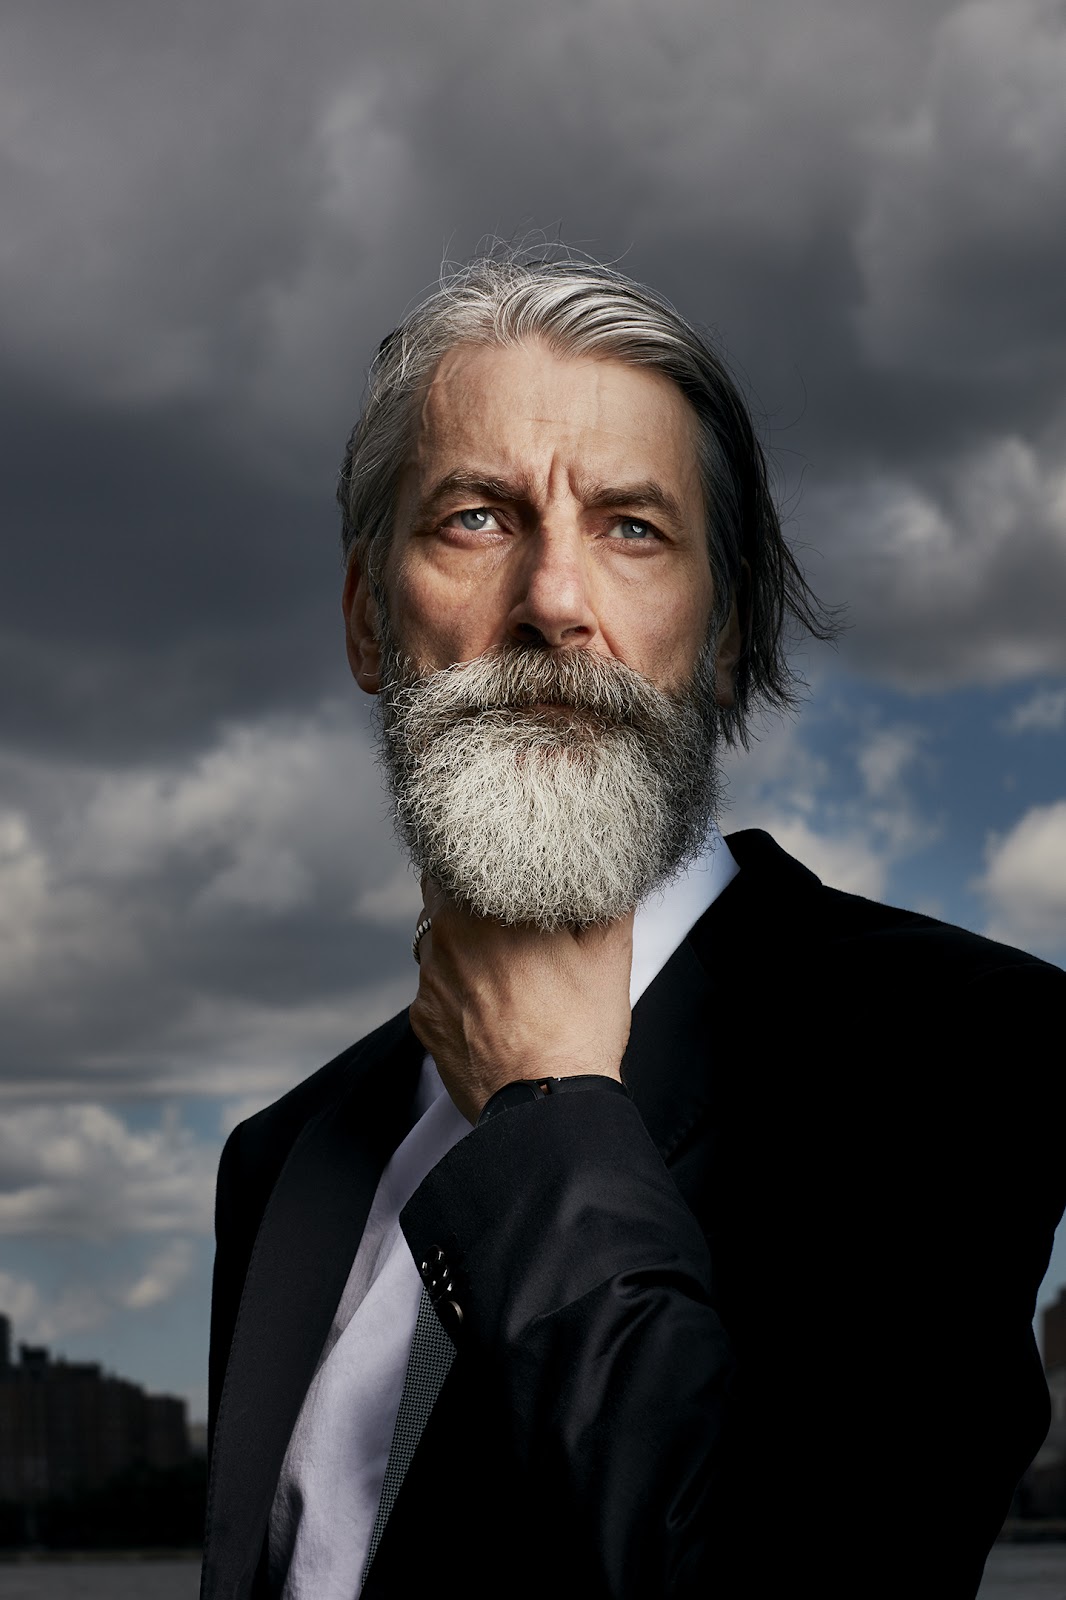 This moody image was created over the Covid-19 lockdown by Matt Carr as part of a personal project. The subject is a man in a suit looking very contemplative. He is fscing the camera, staring off into the distance. His silver hair and beard are wind-swept. In the background, gray, rain-heavy clouds cover the sky.